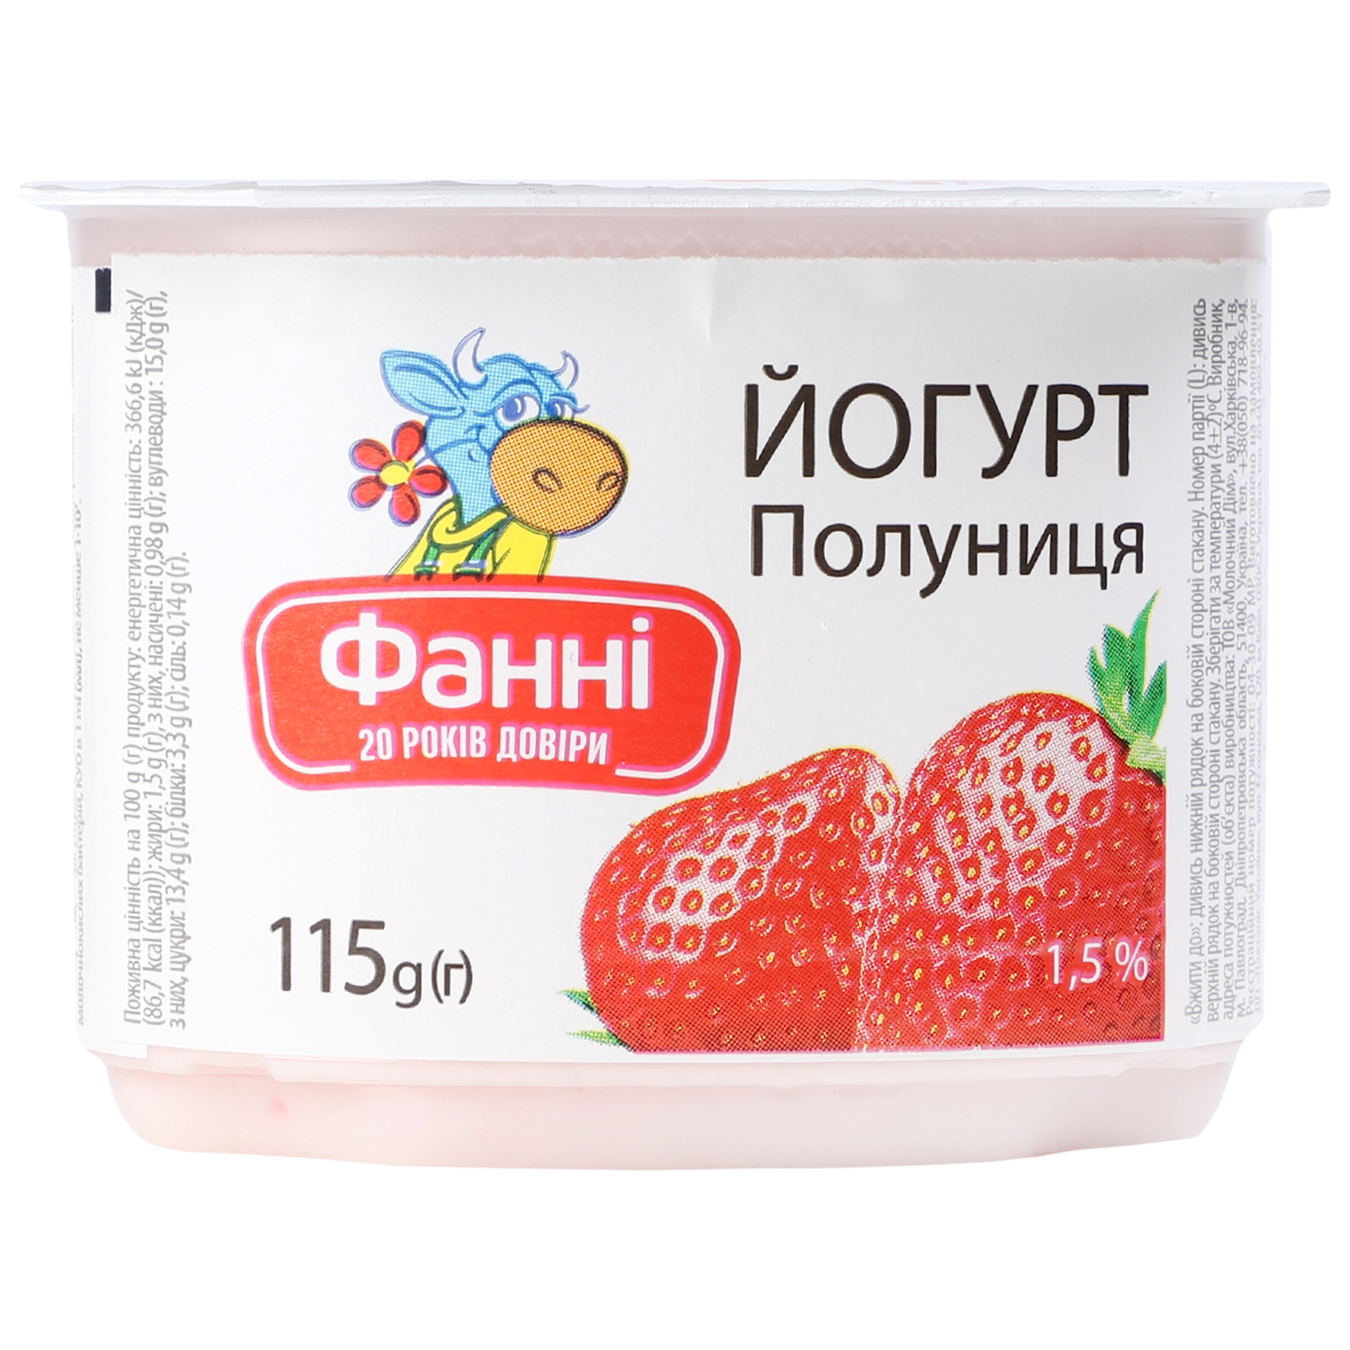 Fanny yogurt with strawberry filling cup 1.5% 115g